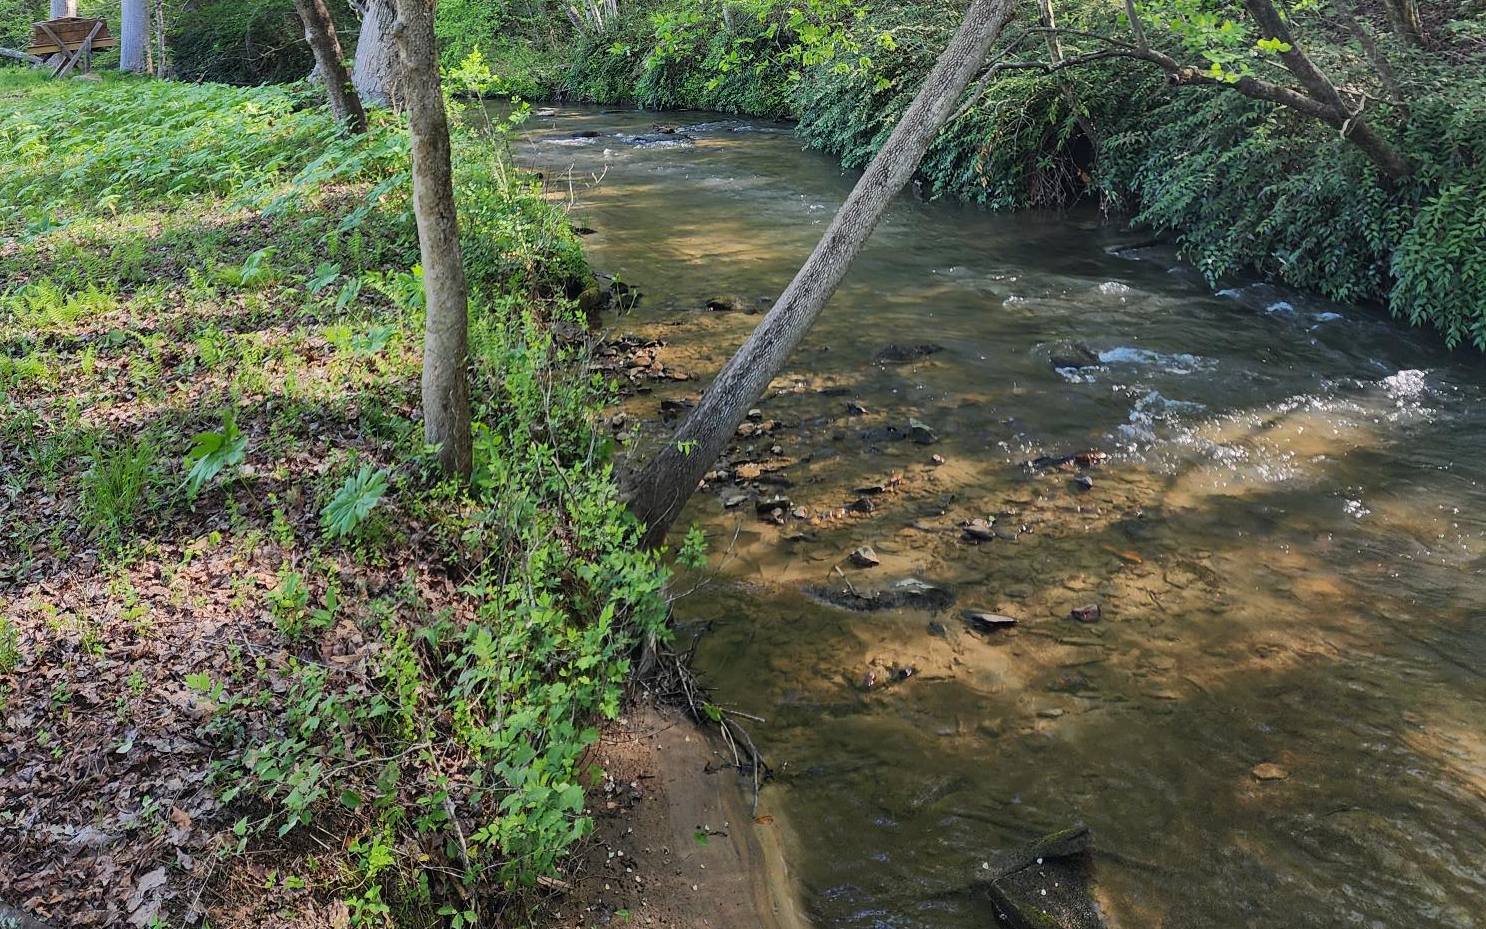 Hot House Creek Frontage! Fly fish in your own trout stream. Loud sounds of the rushing creek year around on this partially wooded/pasture 1.86 acre lot. This property is conveniently located less than 15 minutes from downtown Blue Ridge, Lake Blue Ridge and the Toccoa River.